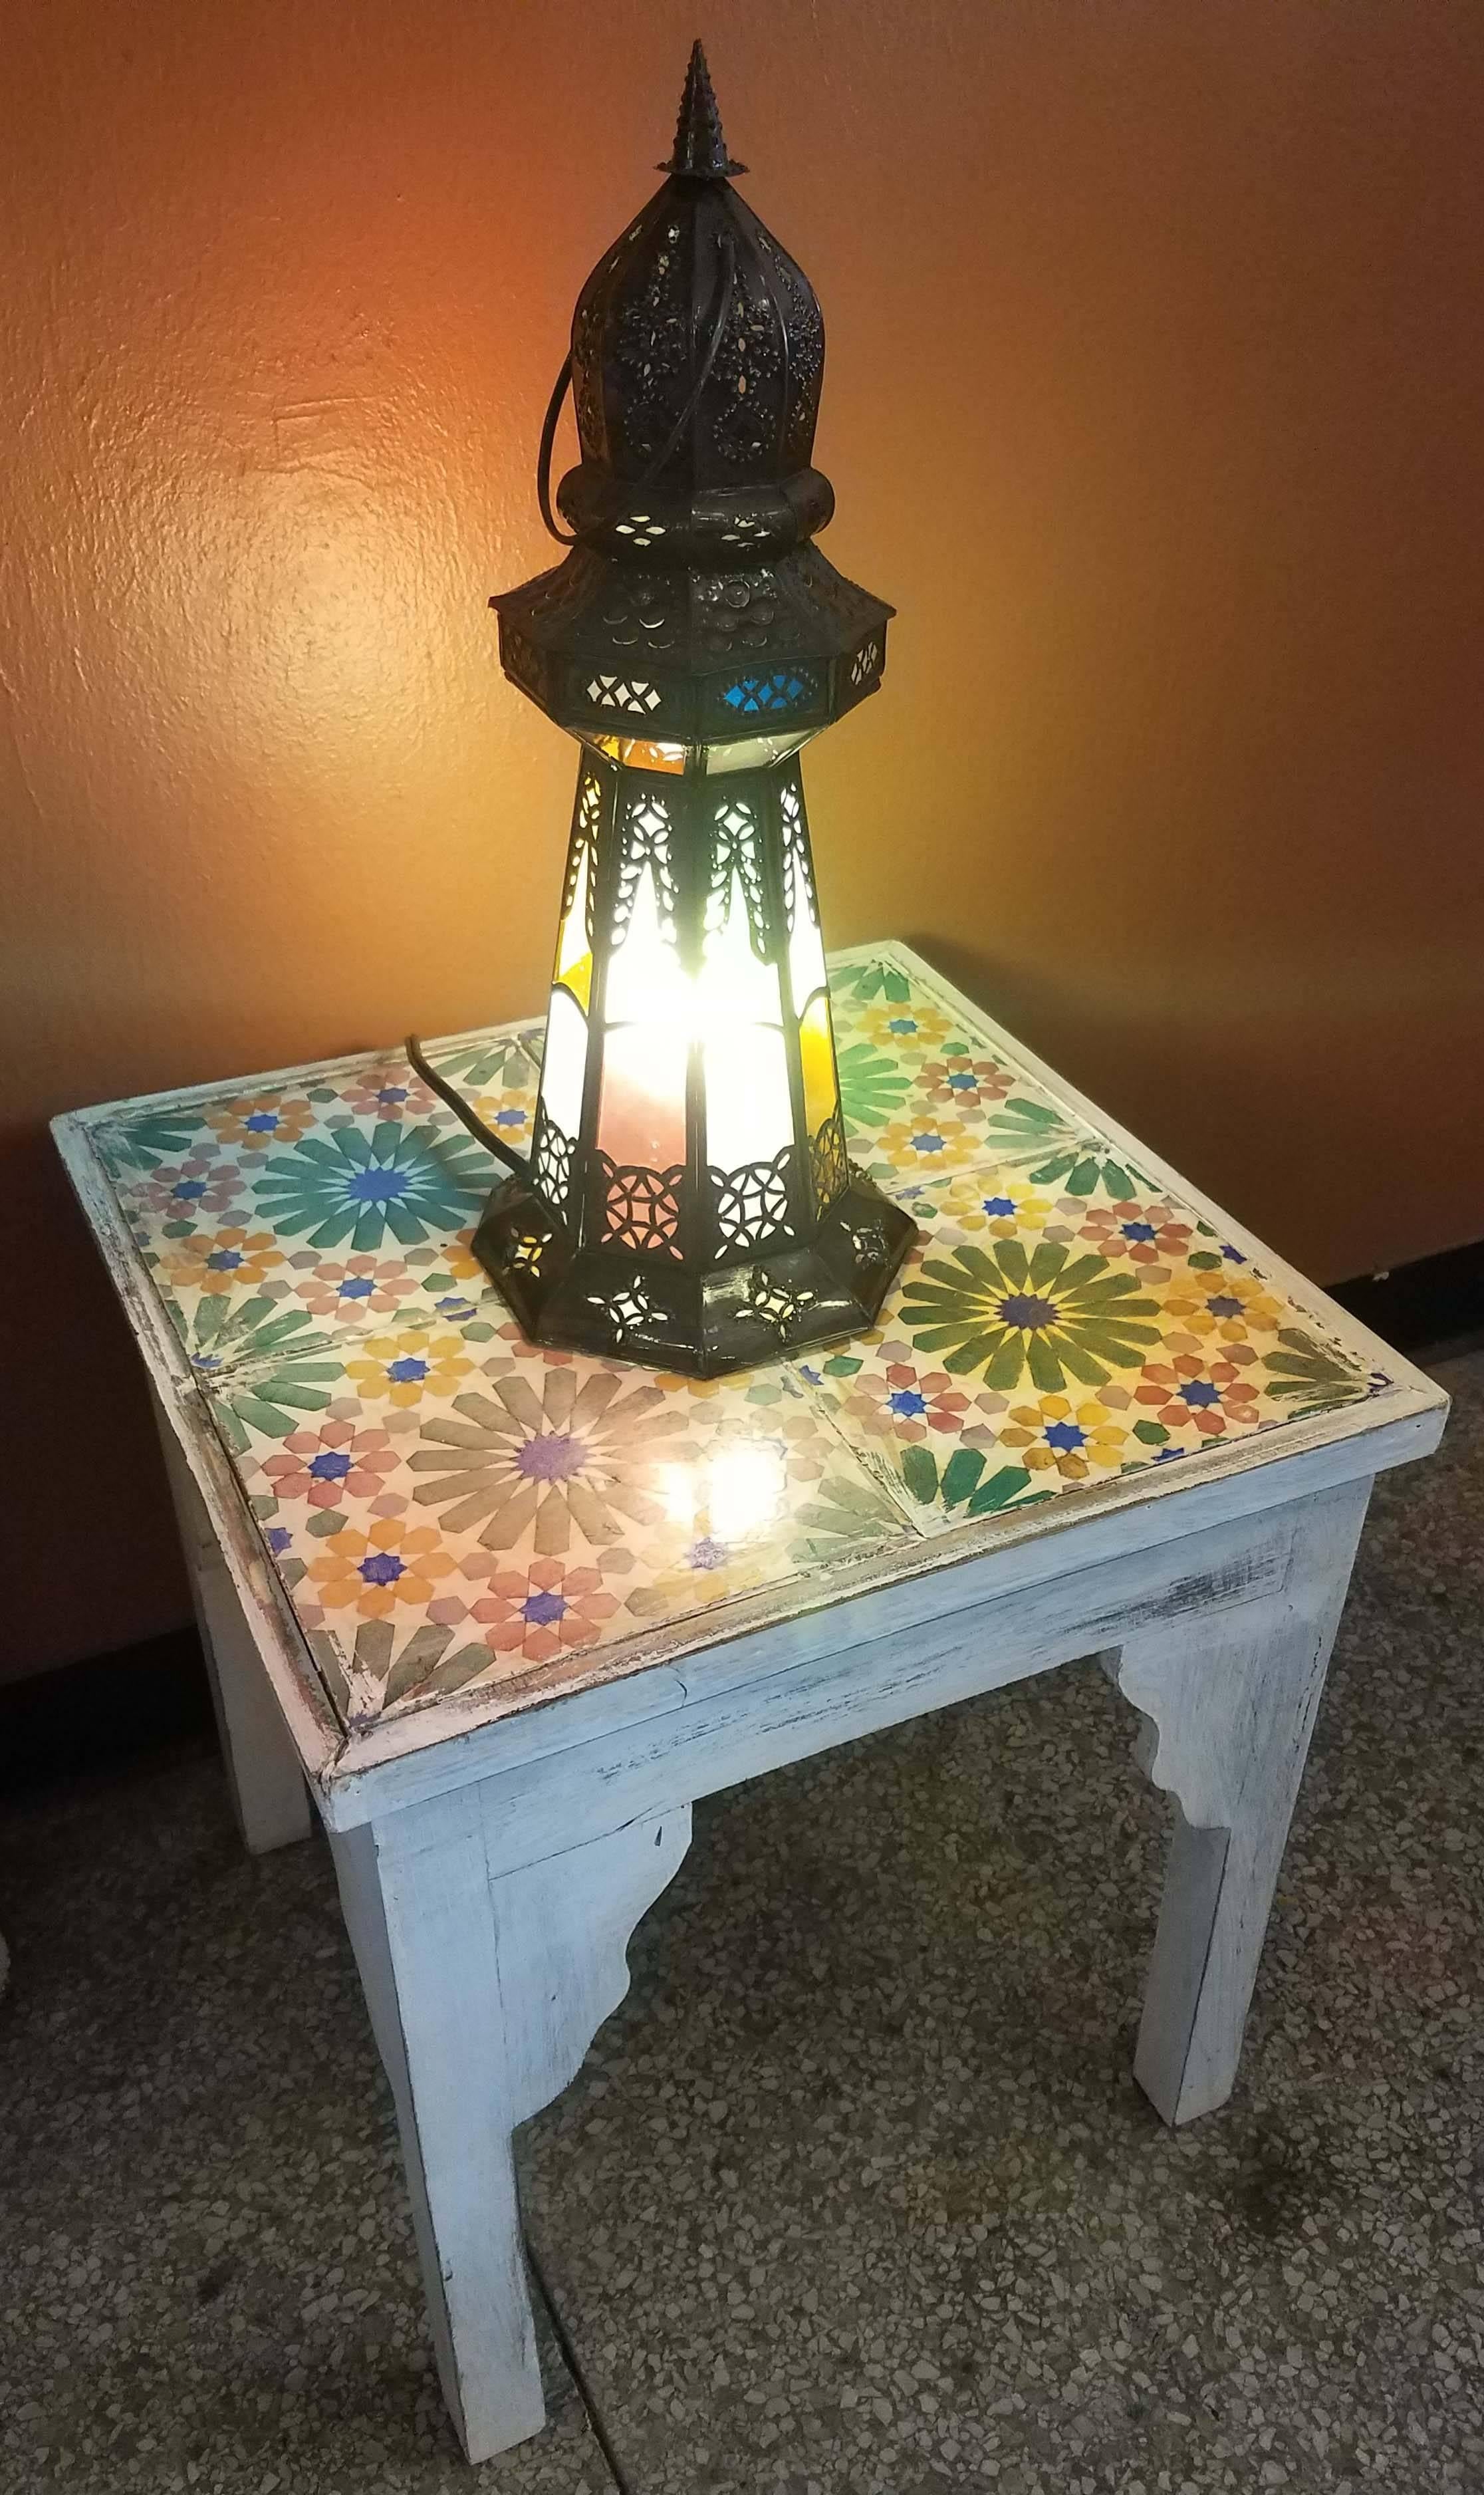 Medium size Moroccan pierced metal lantern, Lighthouse style with multi-color frosty glass on a copper stained frame, measuring approximately 17